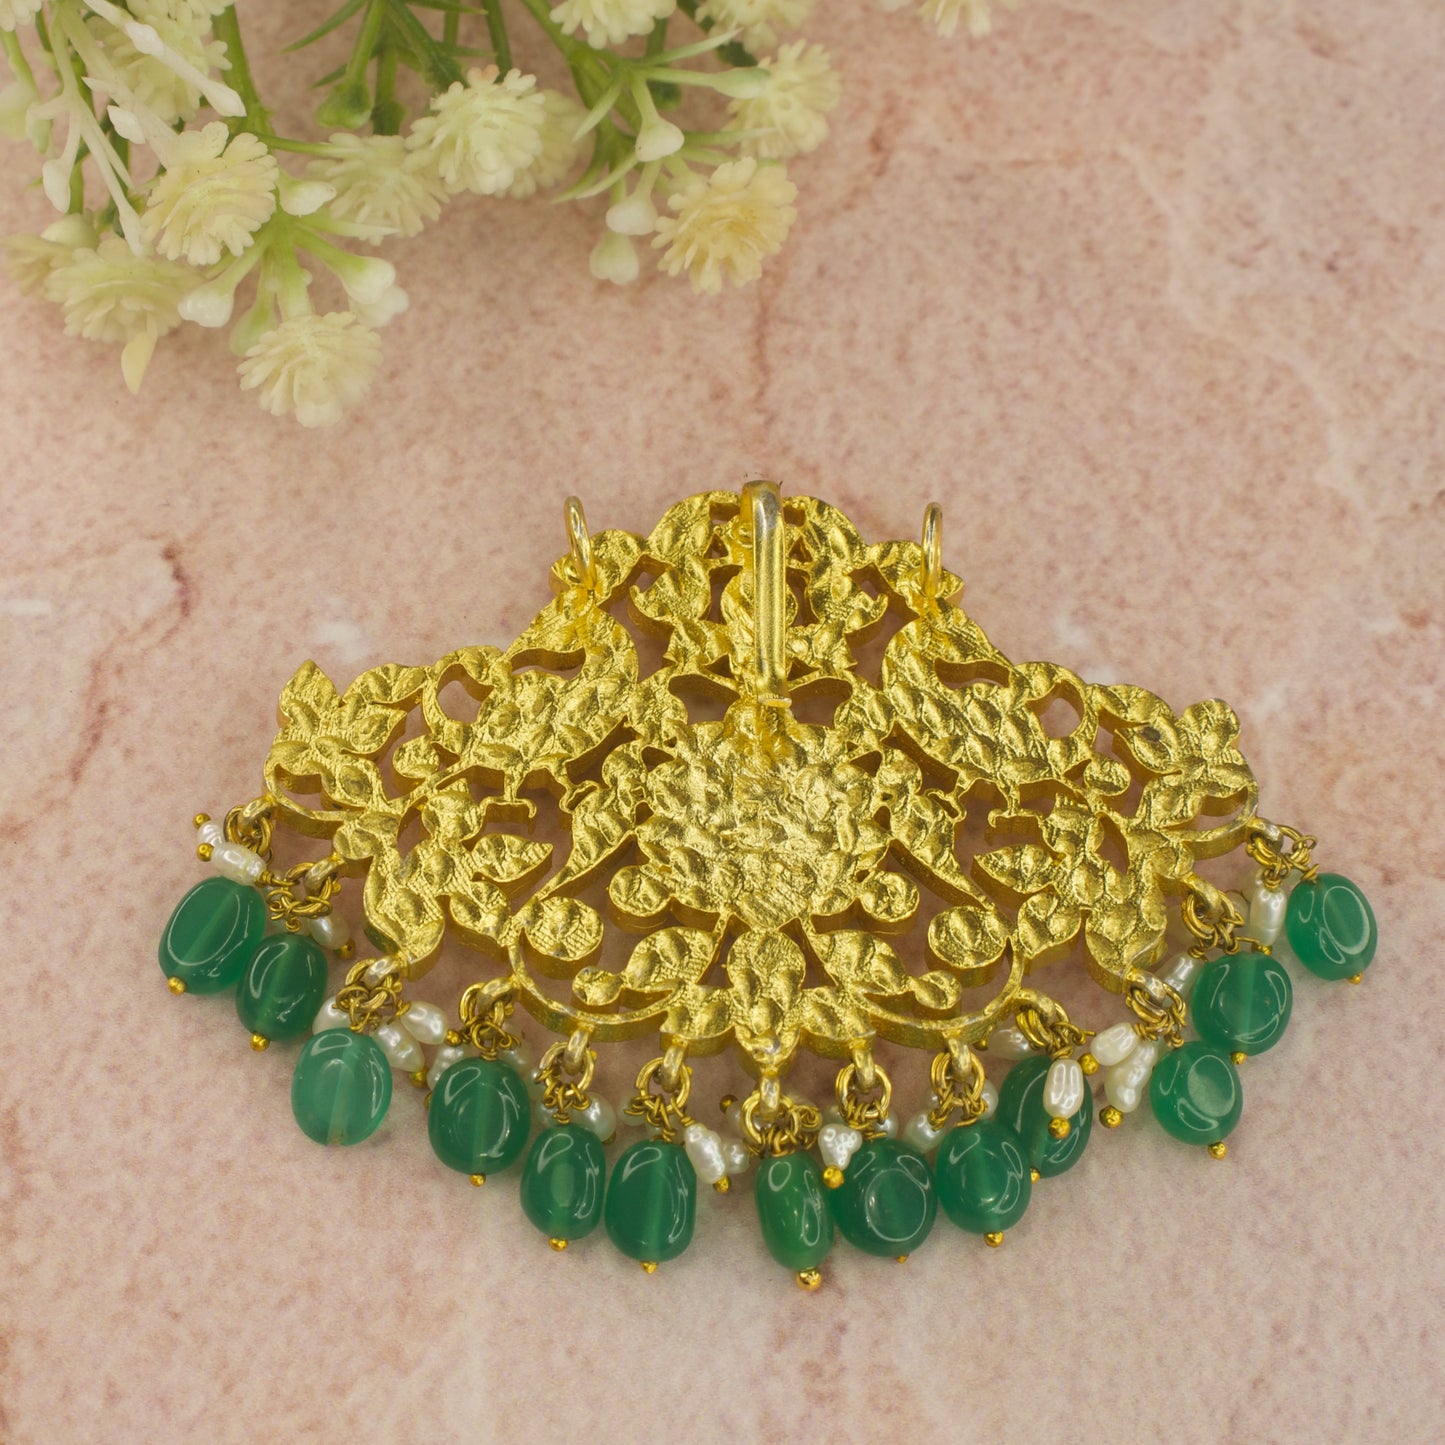 This is a Jadau Kundan pendant with Flower and peacock motifs . This pendant is covered in 22k Gold plating & at the bottom of the pendant we have ricepearls and green beads